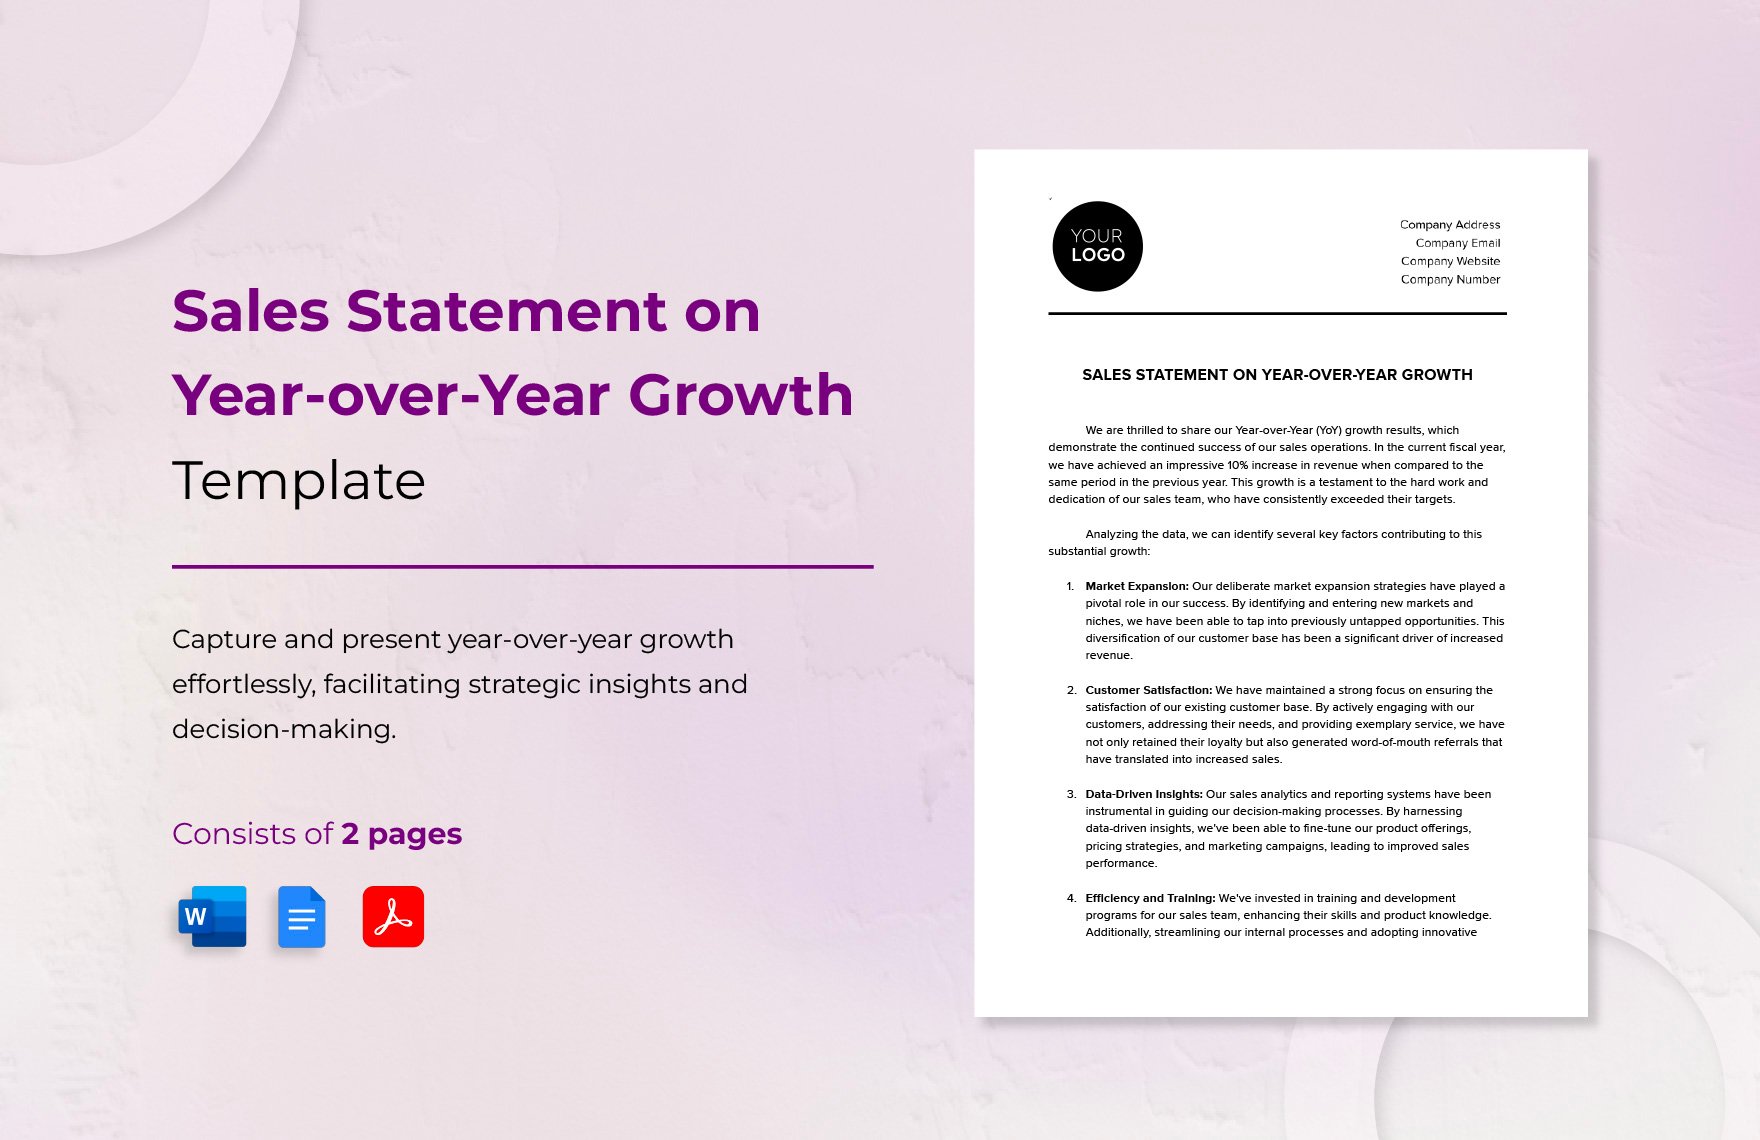 Sales Statement on Year-over-Year Growth Template